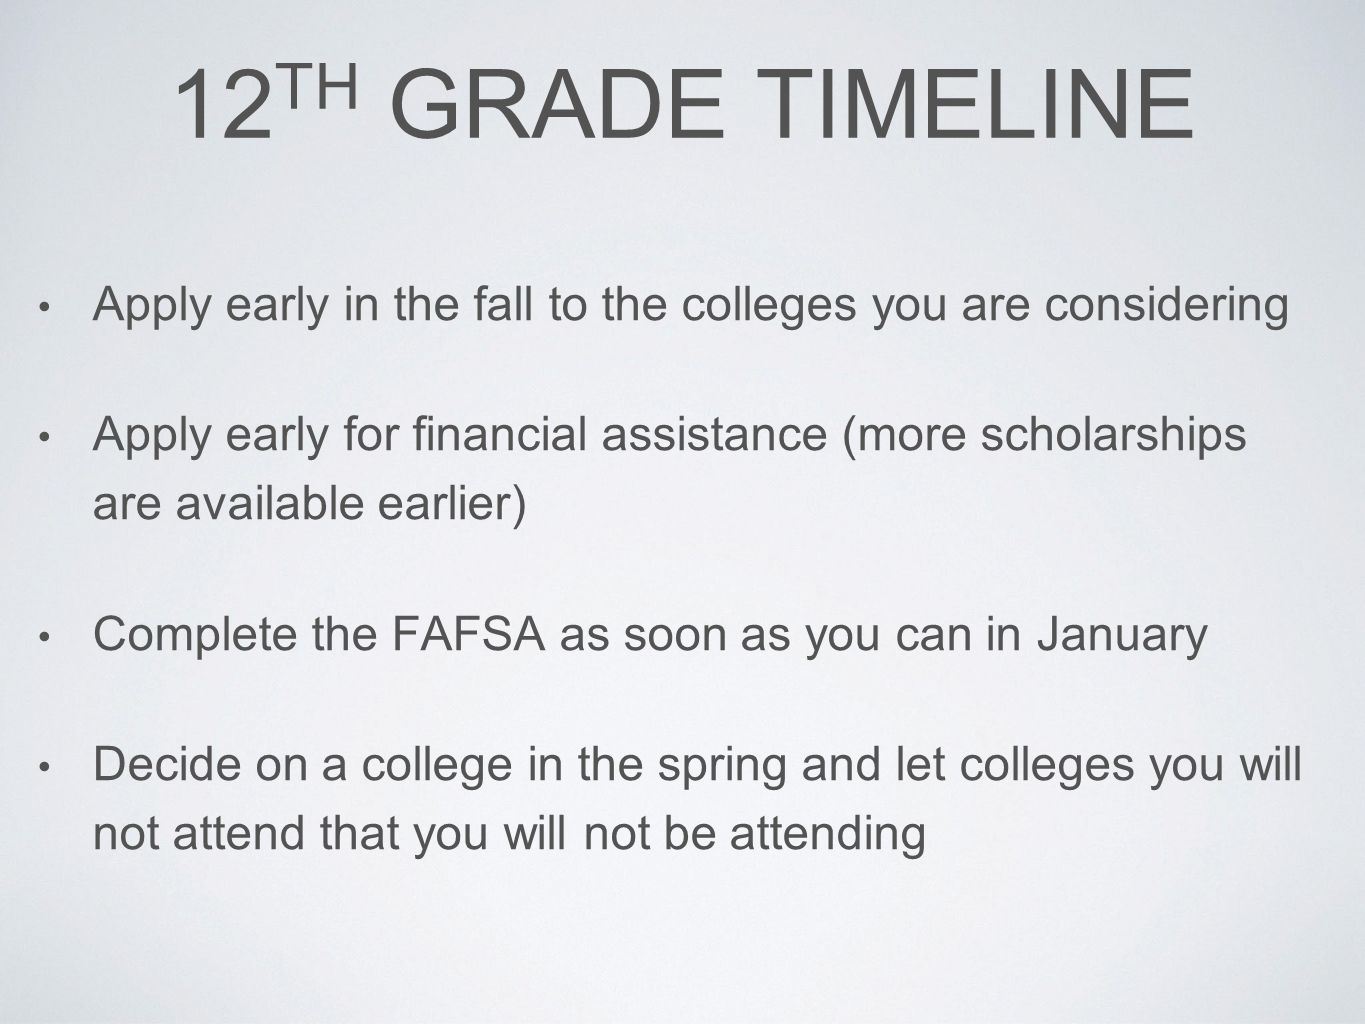 12 TH GRADE TIMELINE Apply early in the fall to the colleges you are considering Apply early for financial assistance (more scholarships are available earlier) Complete the FAFSA as soon as you can in January Decide on a college in the spring and let colleges you will not attend that you will not be attending